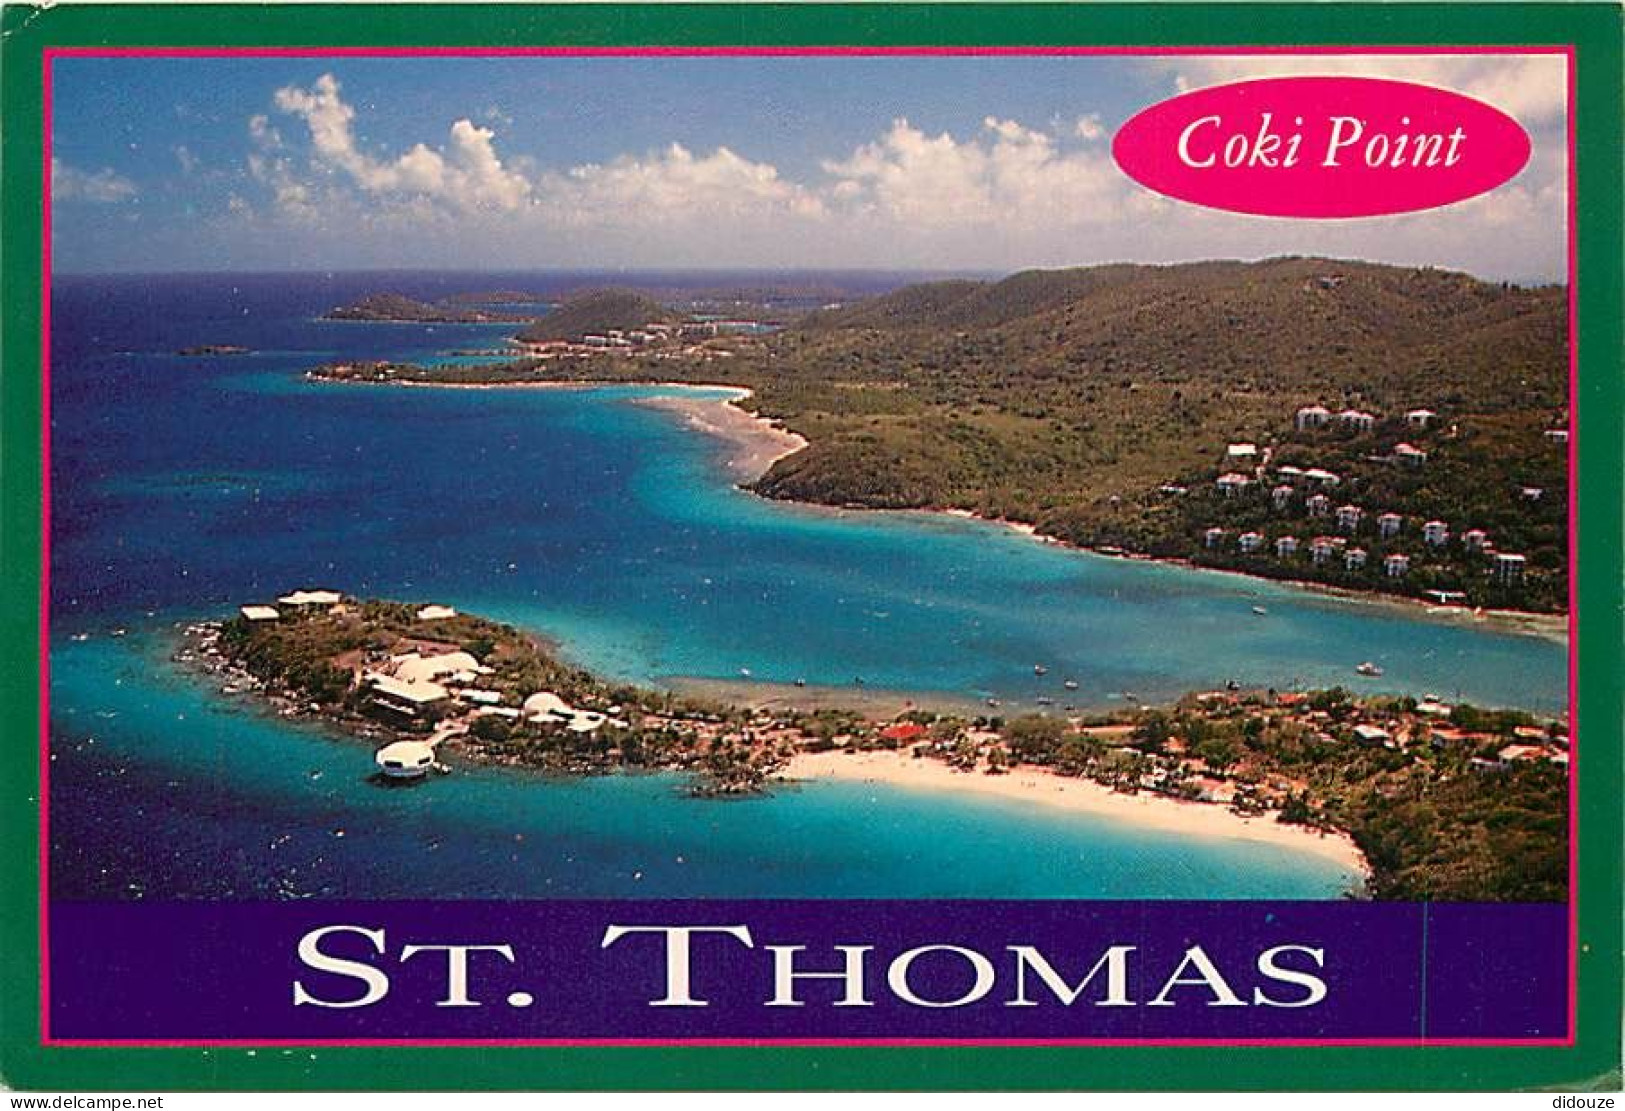 Antilles - Iles Vierges Américaines - U S Virgin Islands - St Thomas - Coki Point Beach And The Coral World Undenwater O - Virgin Islands, US